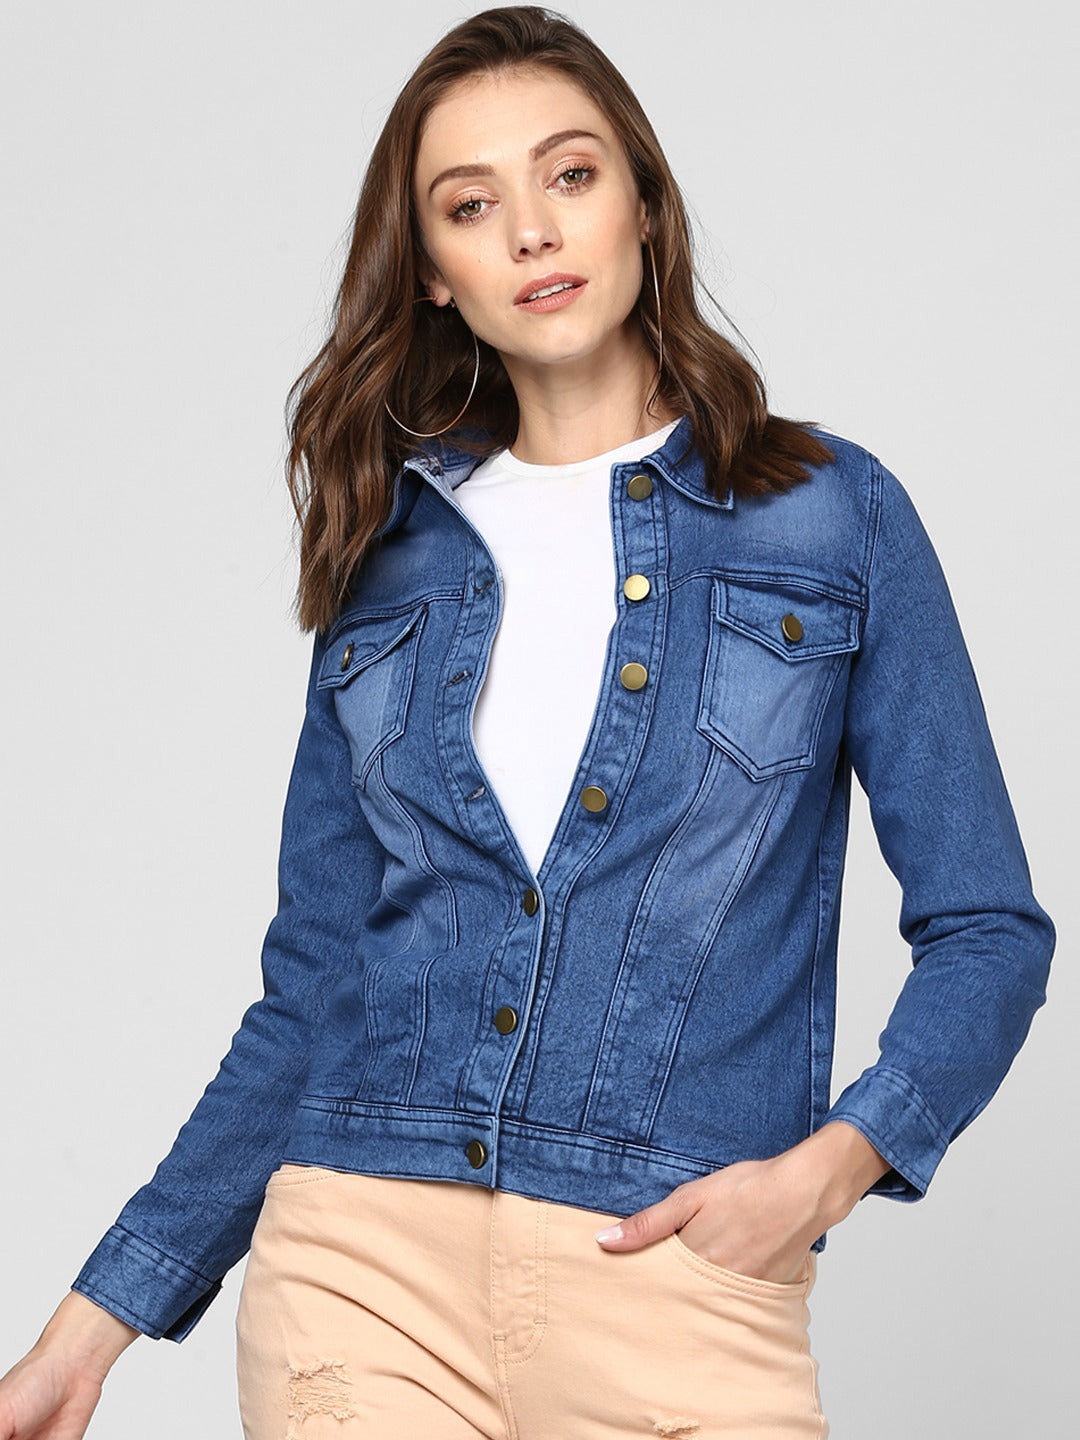 Stylish denim jacket for women, blue solid color, button-down design, casual chic apparel.